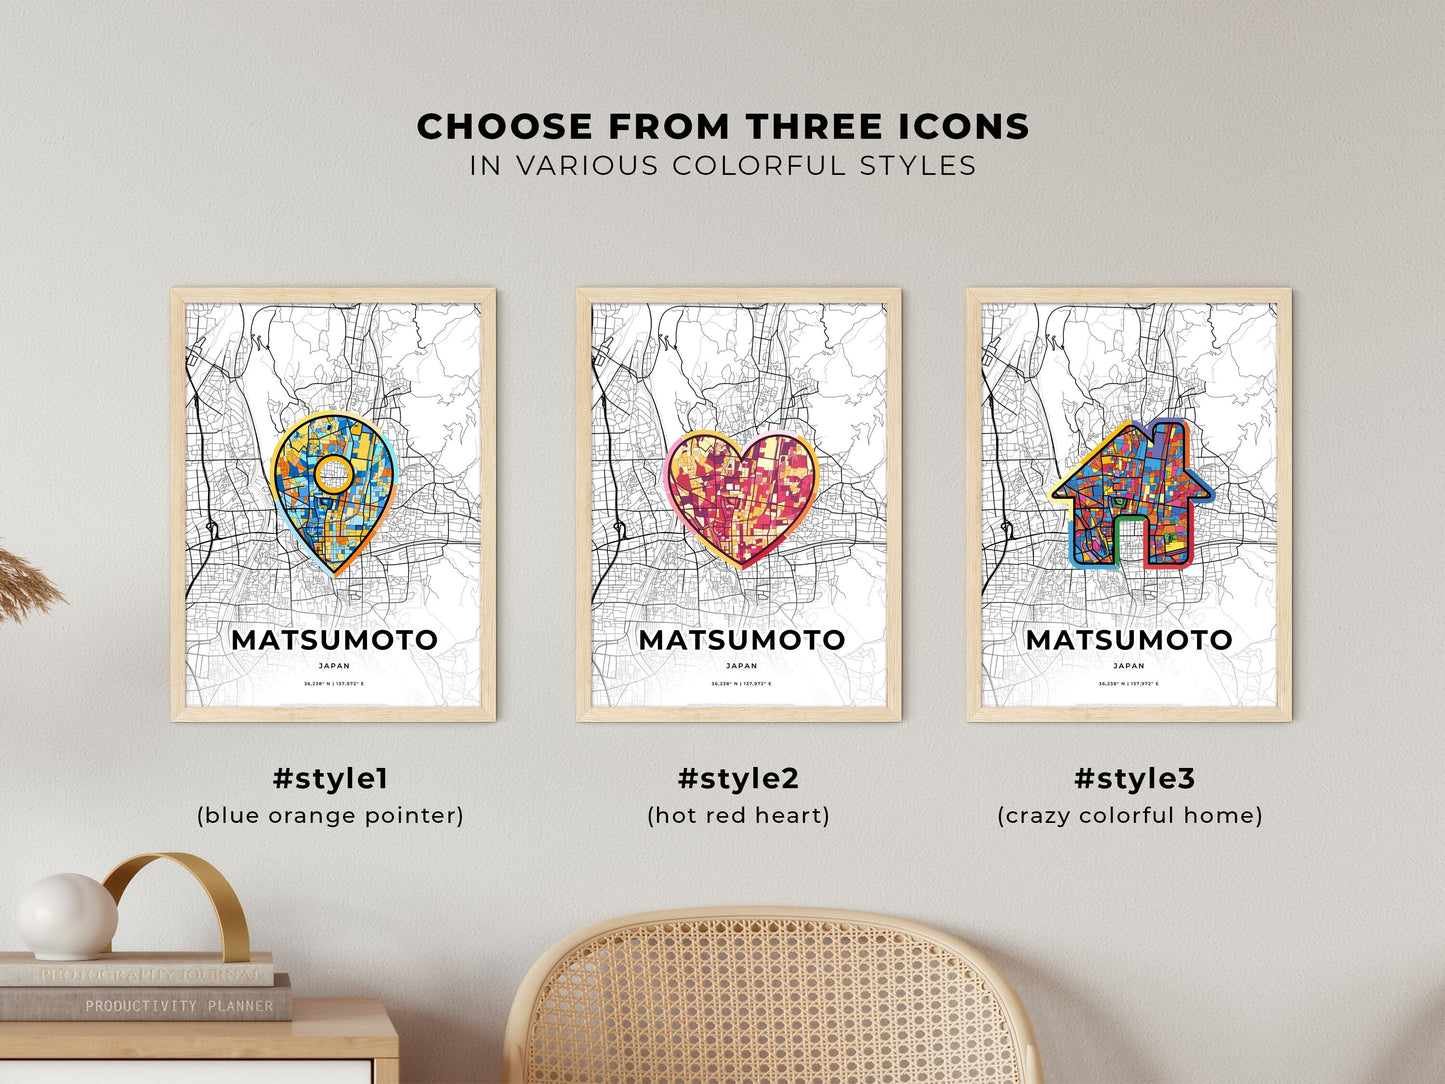 MATSUMOTO JAPAN minimal art map with a colorful icon. Where it all began, Couple map gift.